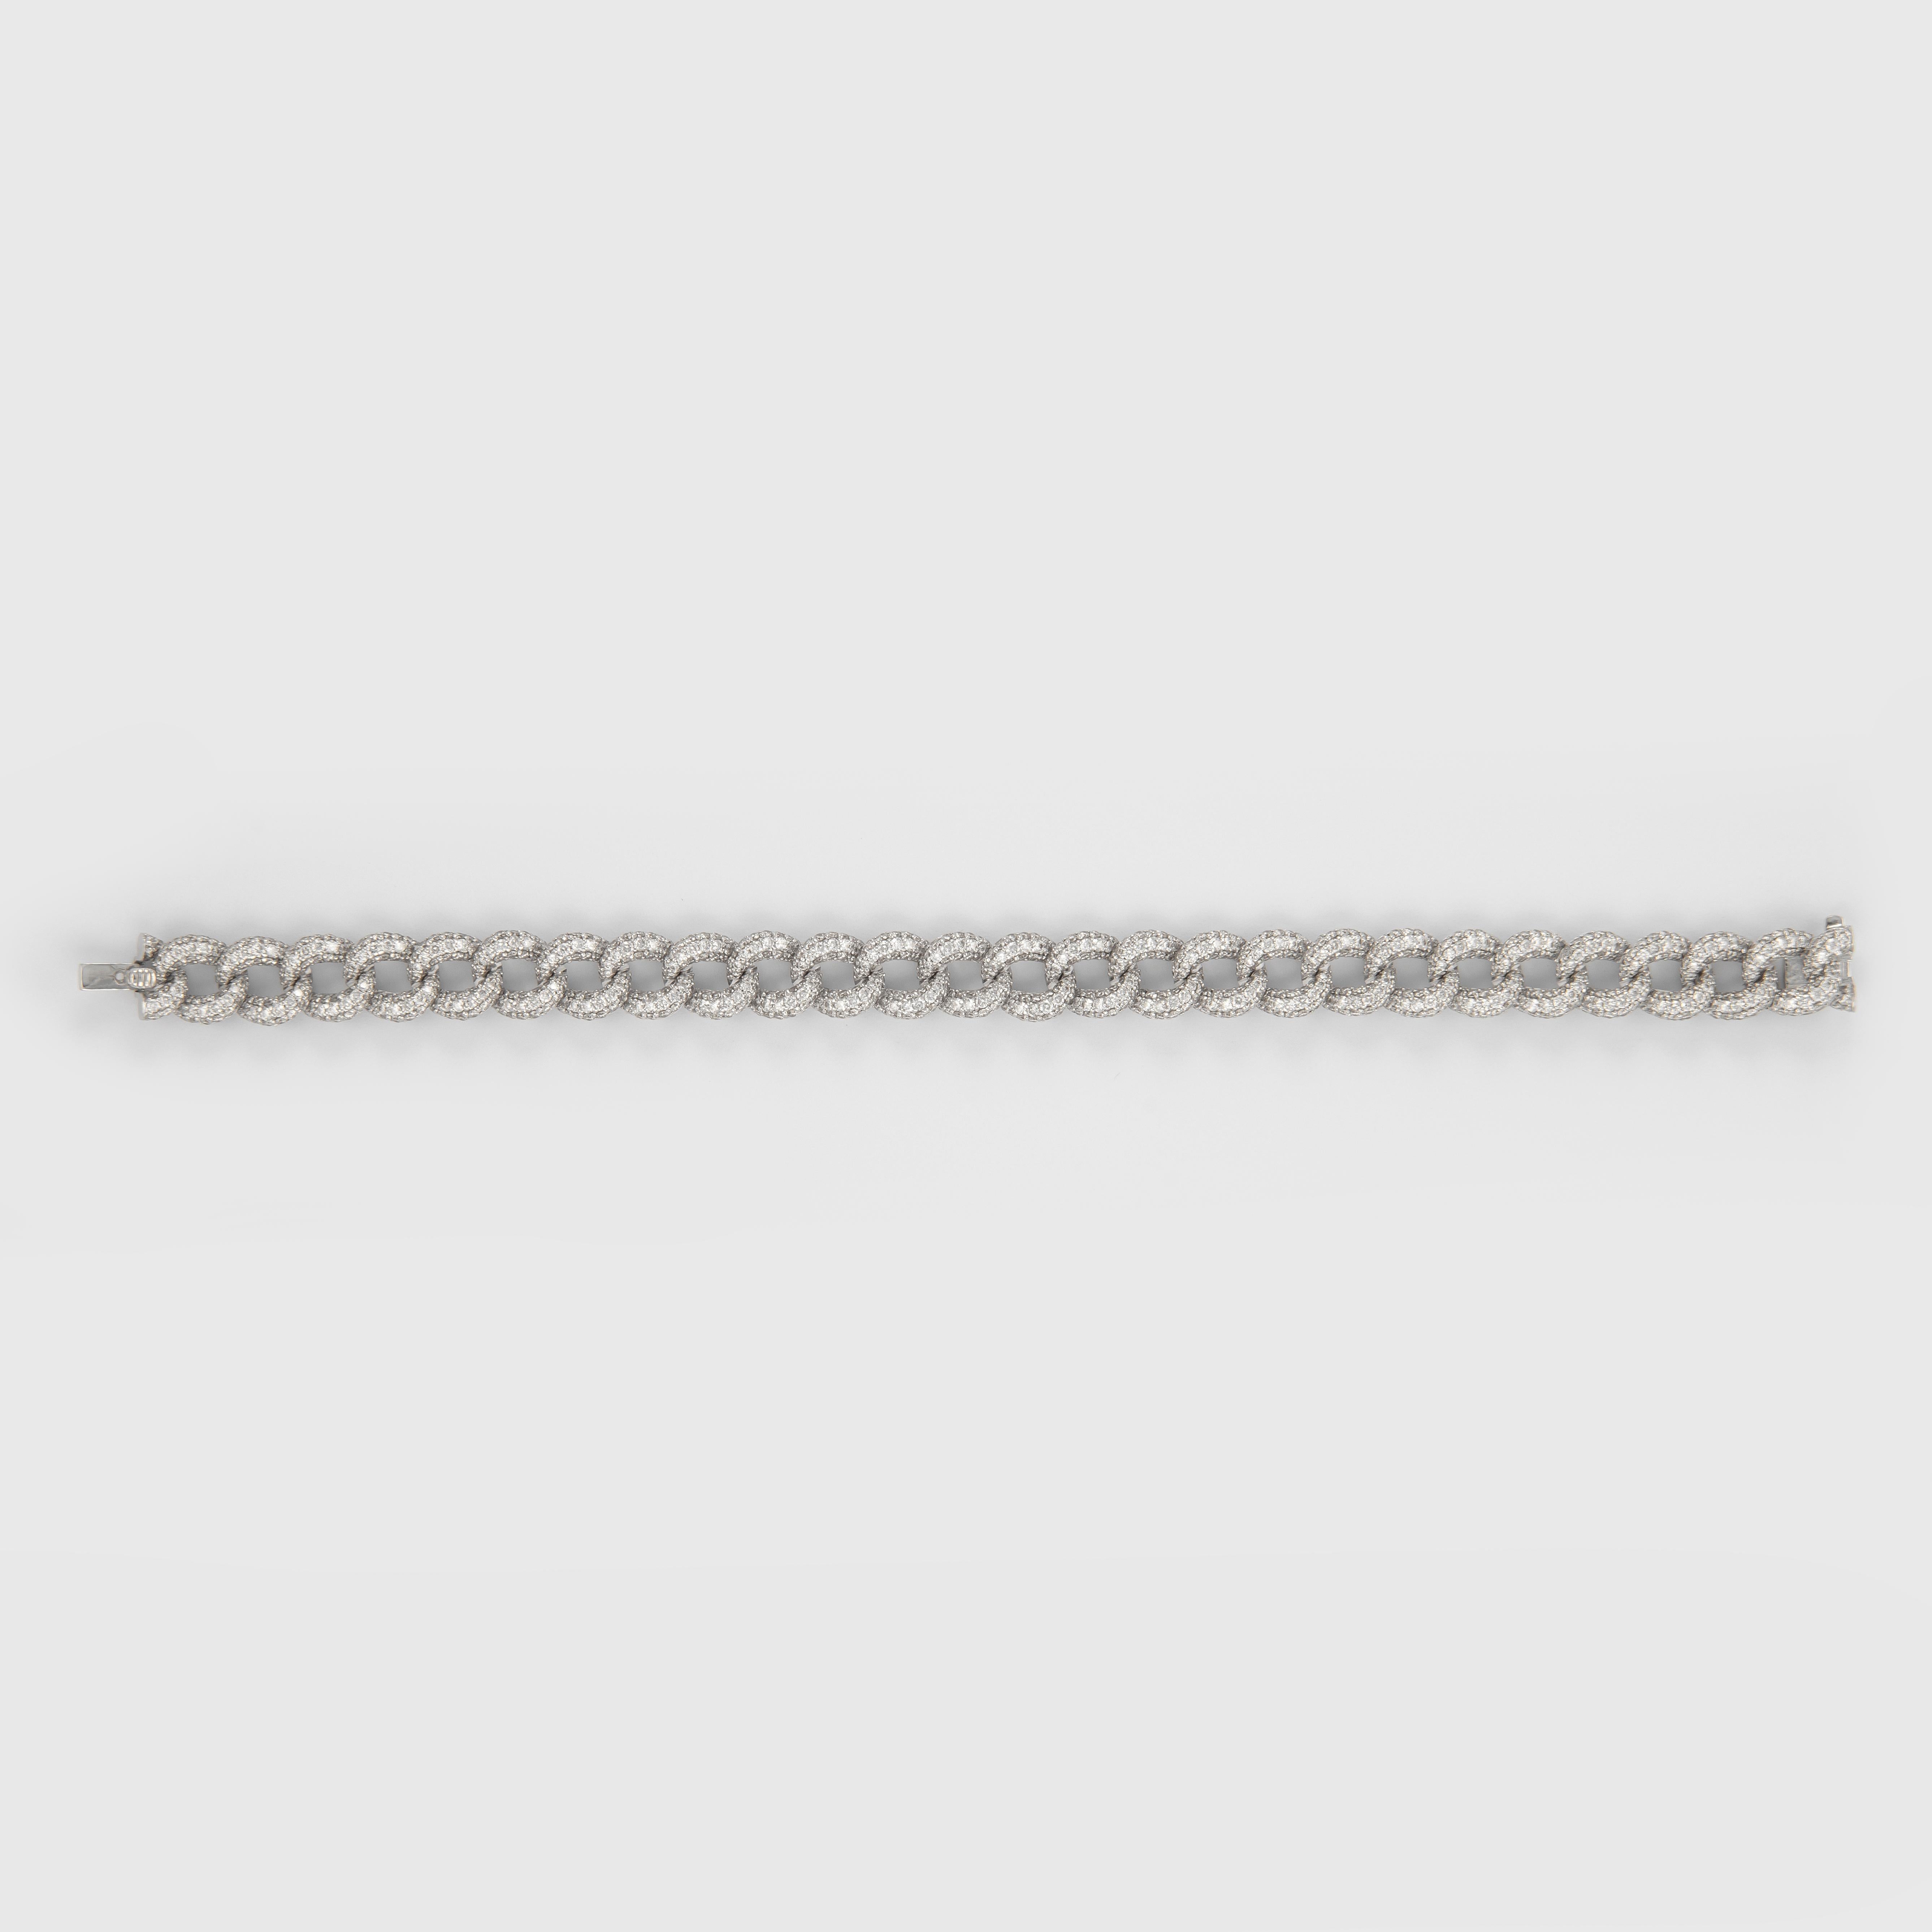 Modern diamond cuban link bracelet. By Alexander of Beverly Hills.
1128 round brilliant diamonds, 8.83 carats total. Approximately G/H color and SI clarity. 18k white gold.
Accommodated with an up to date appraisal by a GIA G.G., please contact us